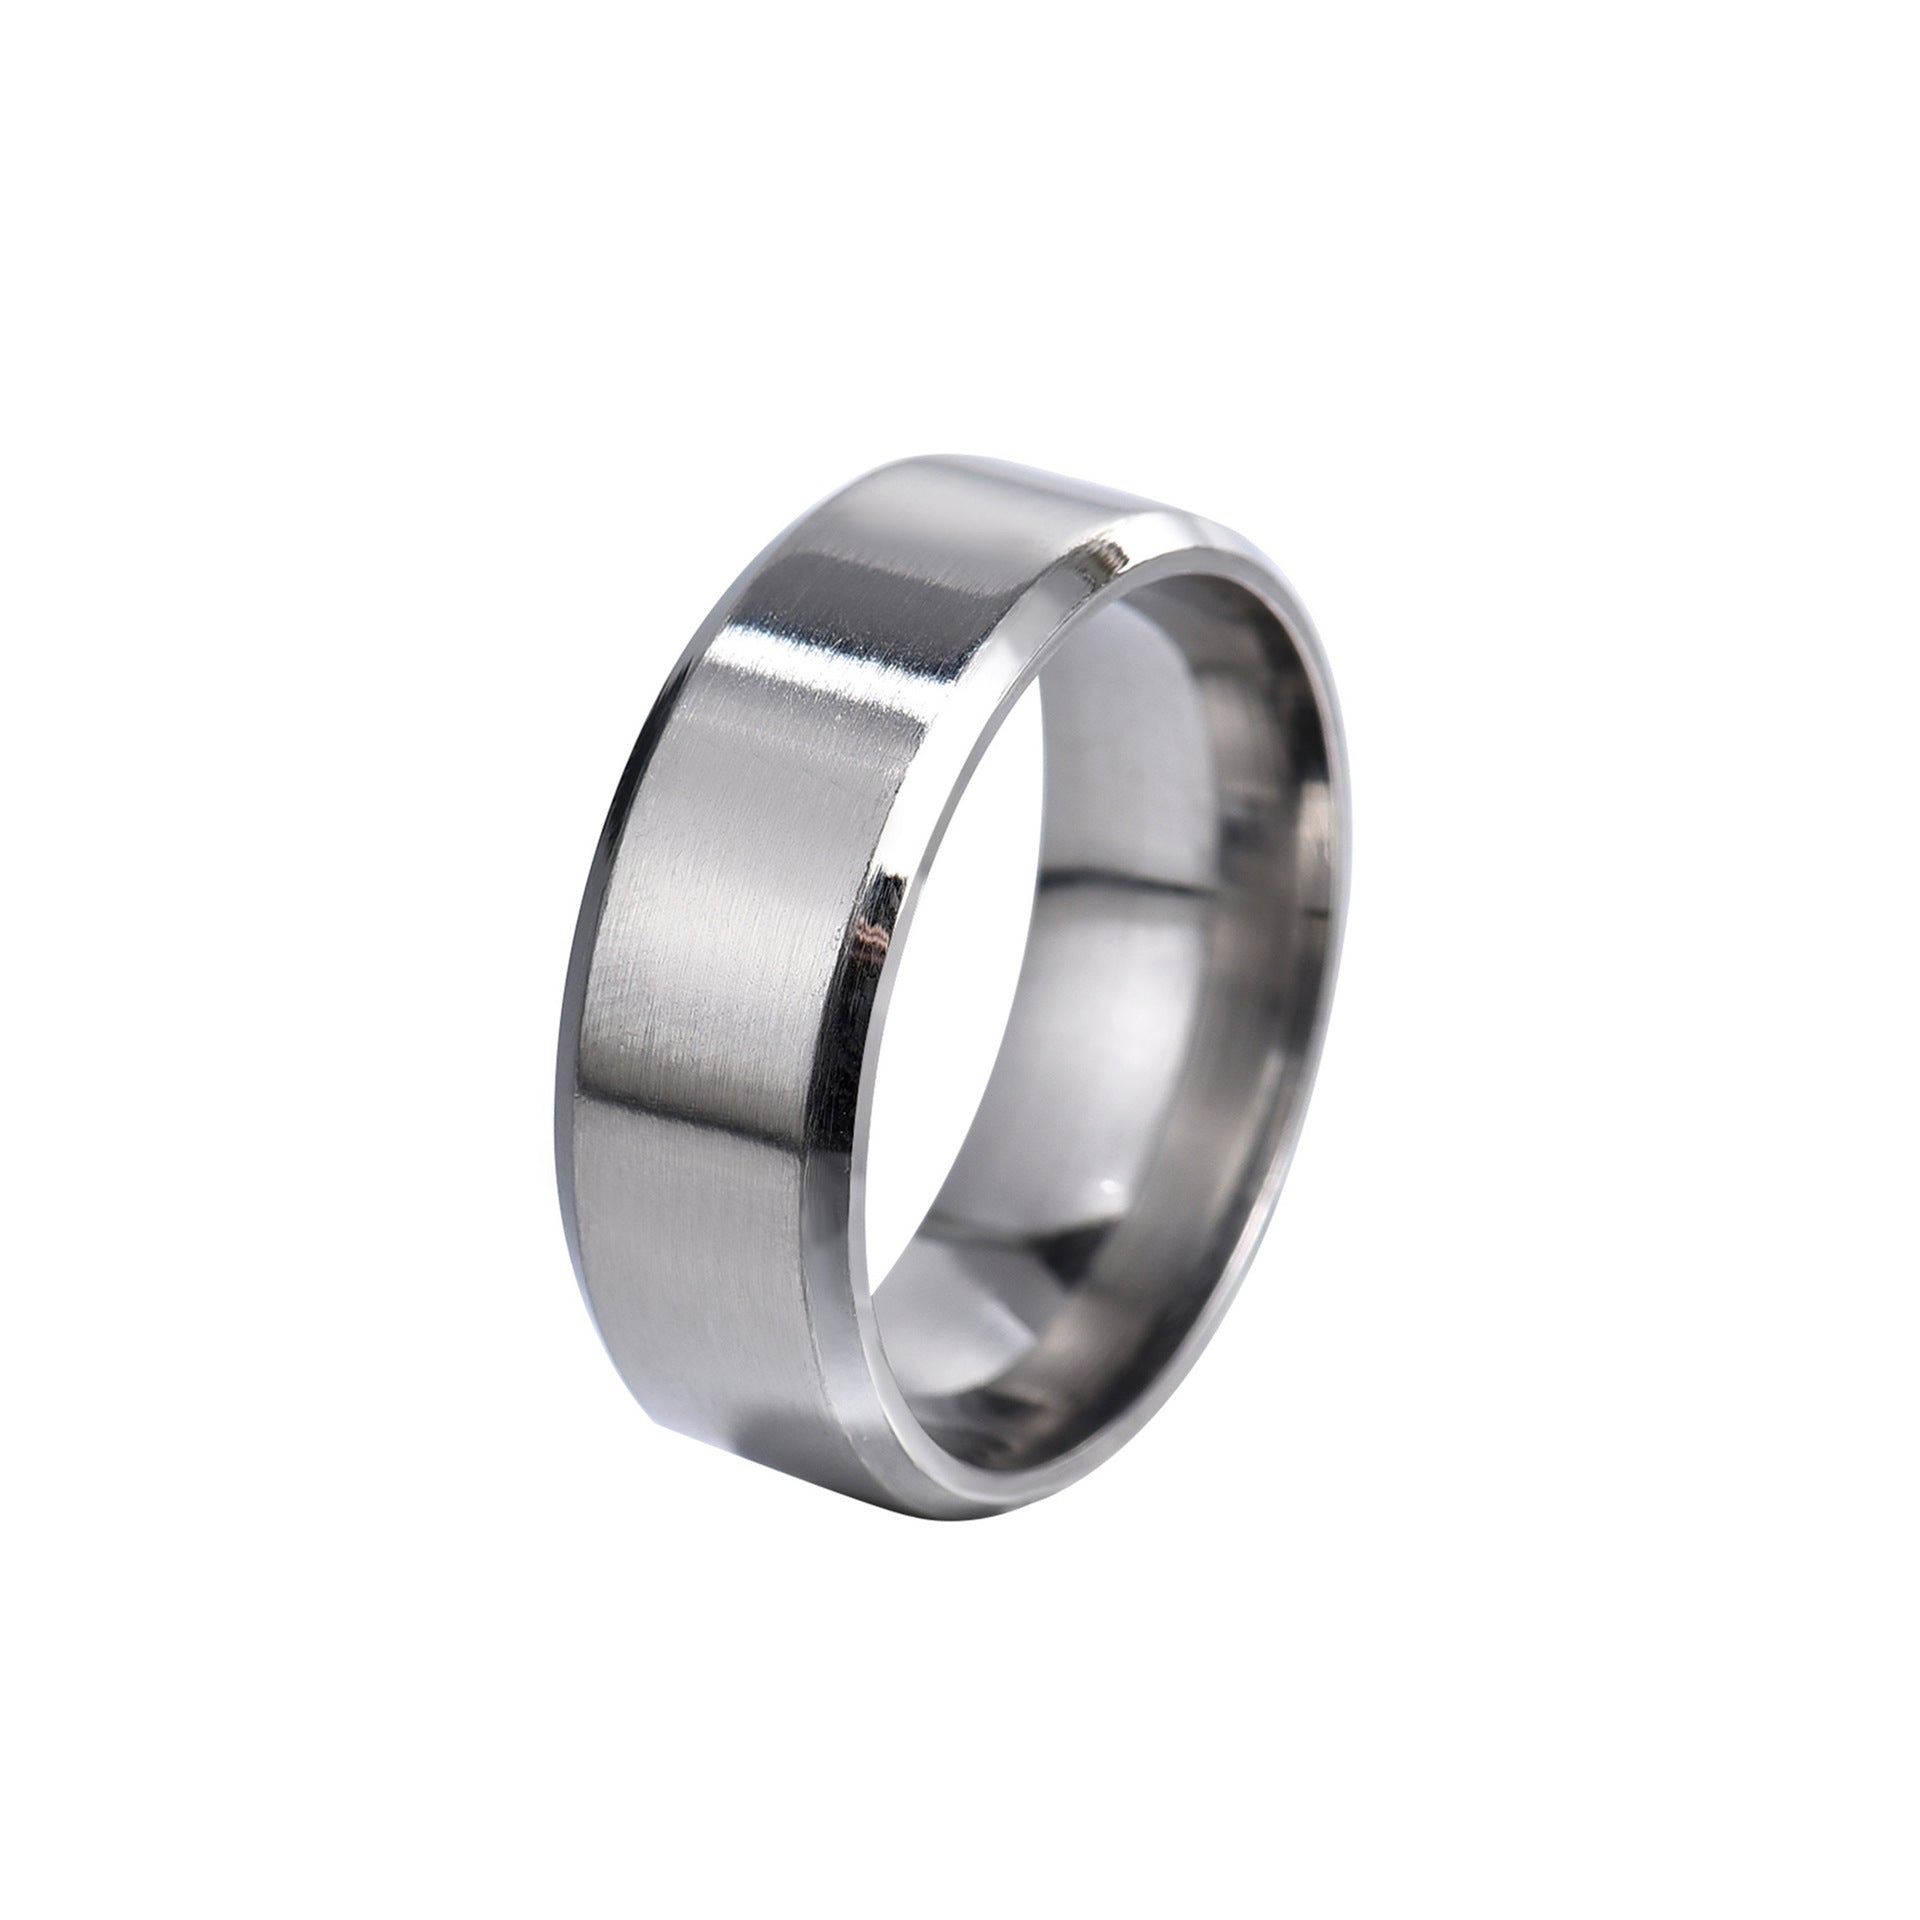 Silver Colored 316L Quality Steel Ring Wedding Ring (25 Size)